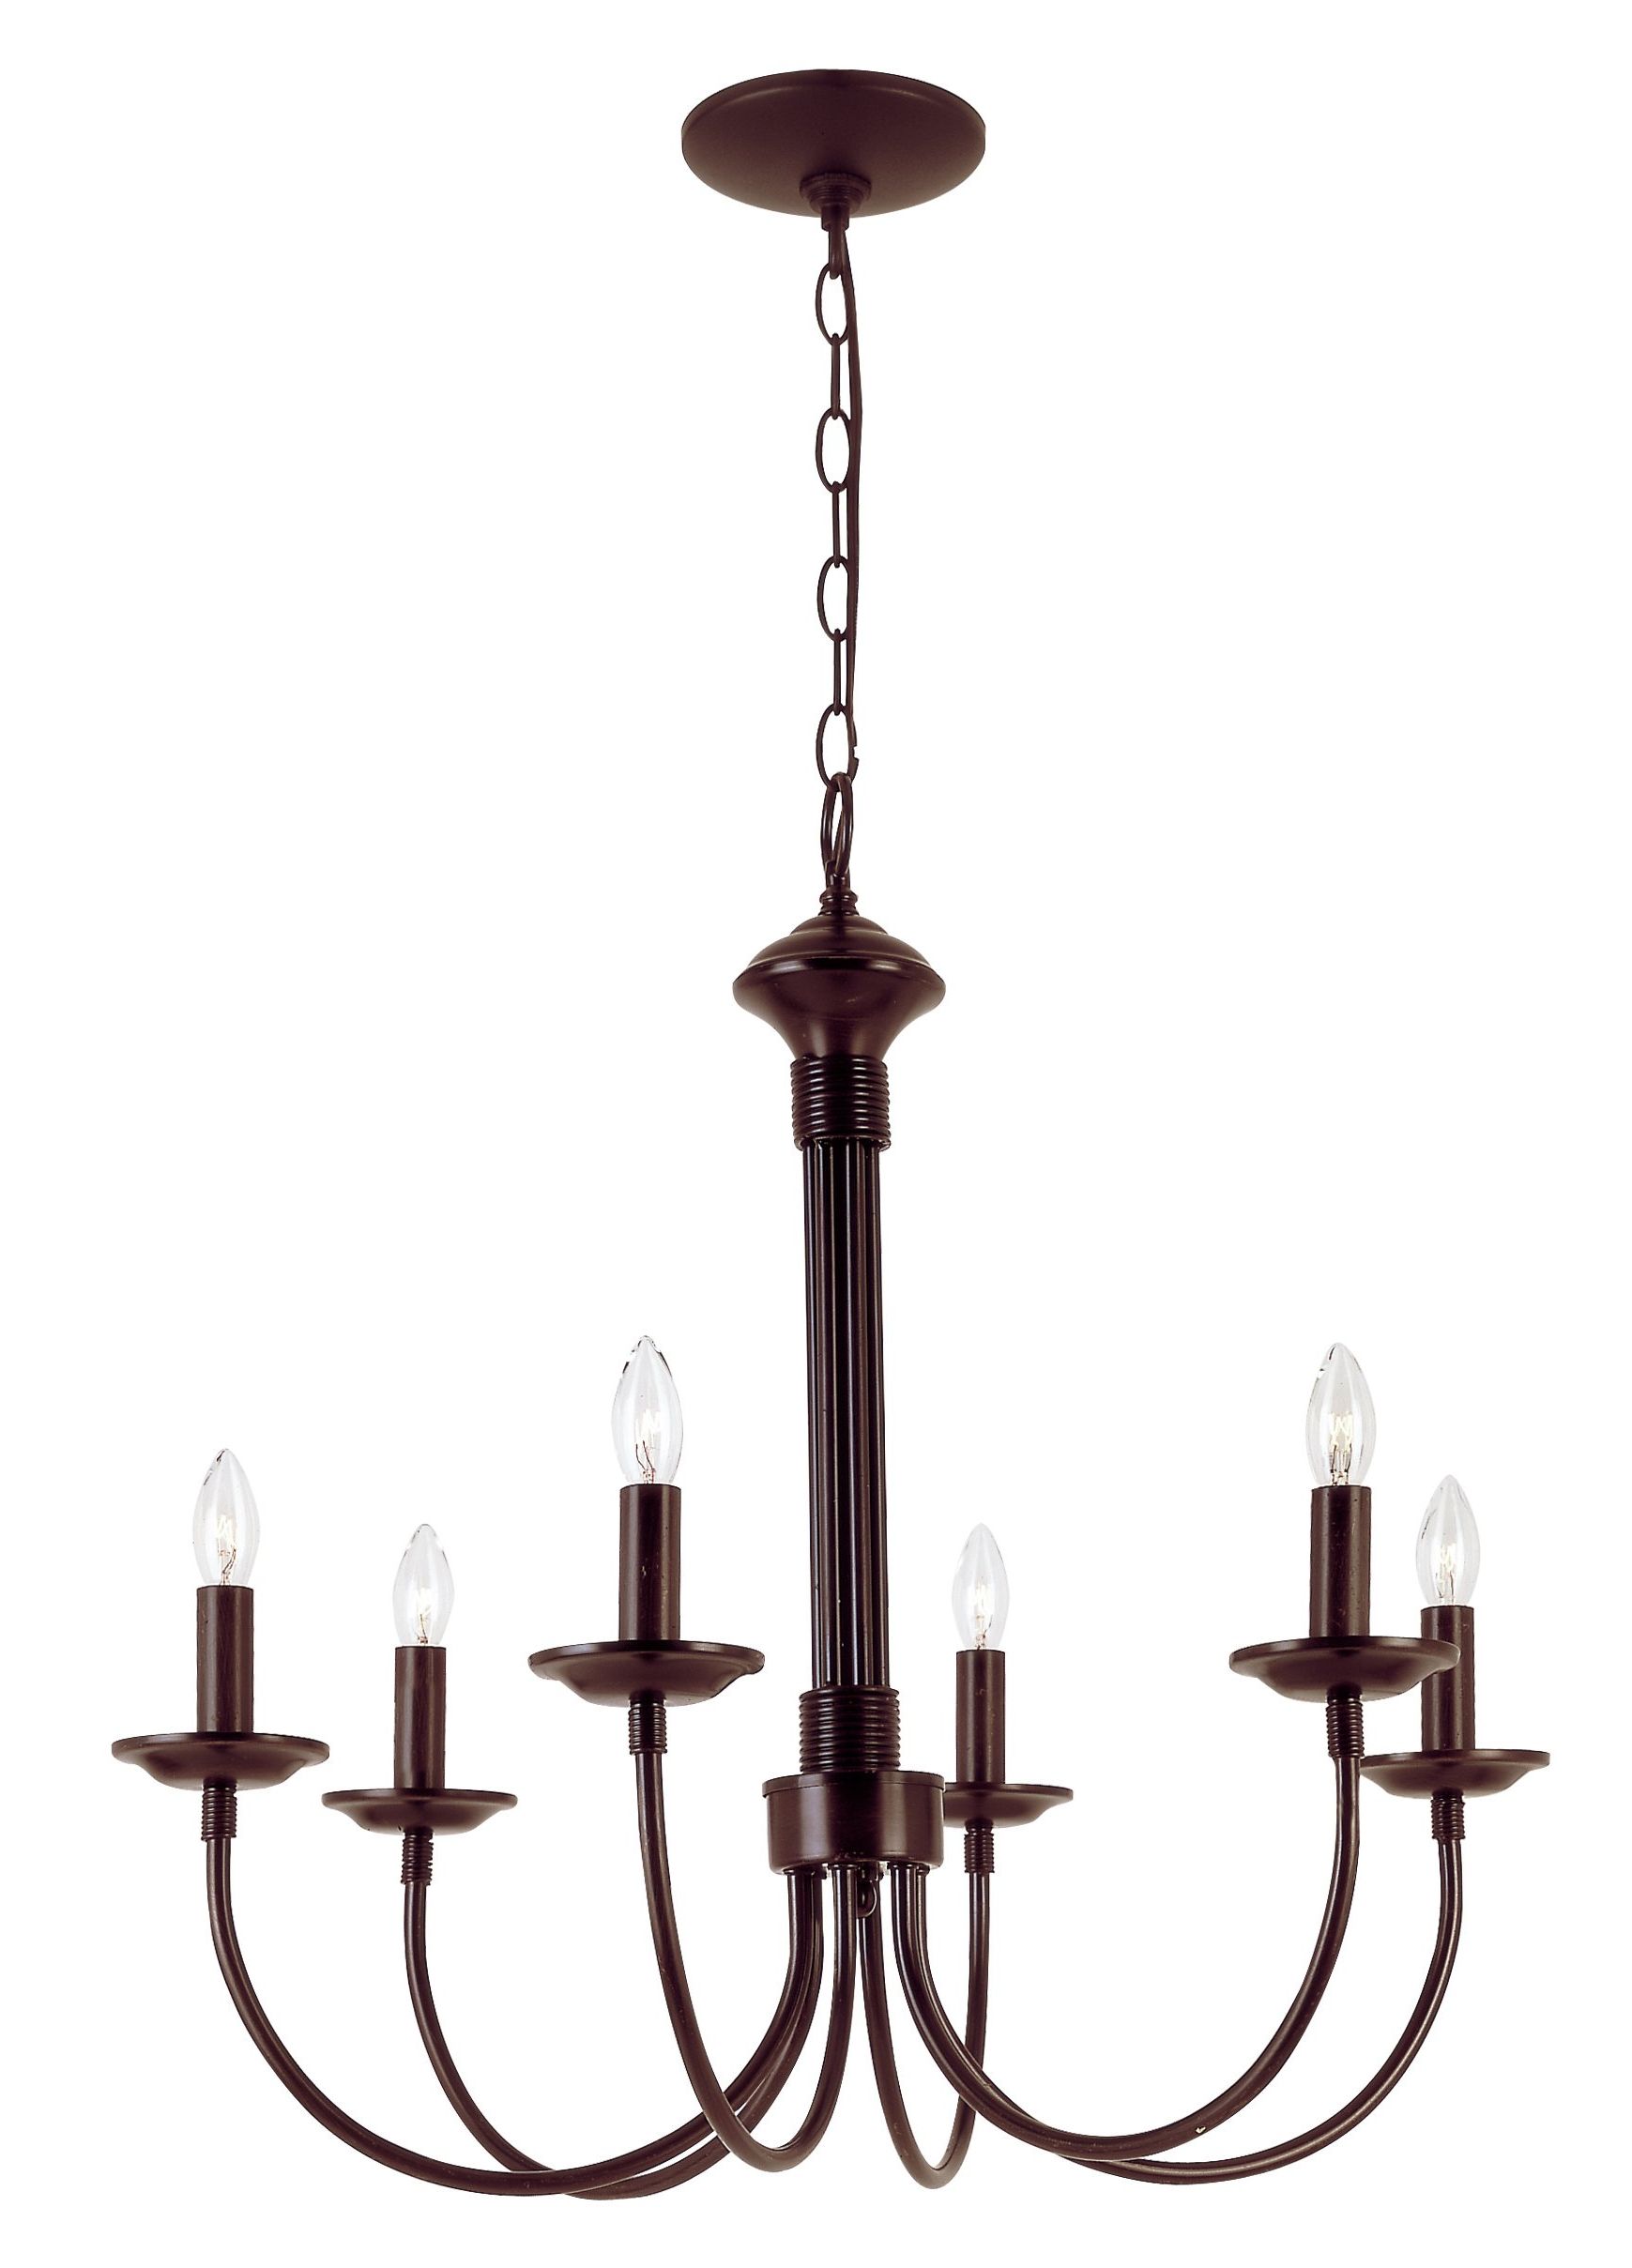 Shaylee 6 Light Candle Style Chandeliers With Best And Newest Shaylee 6 Light Candle Style Chandelier (View 1 of 20)